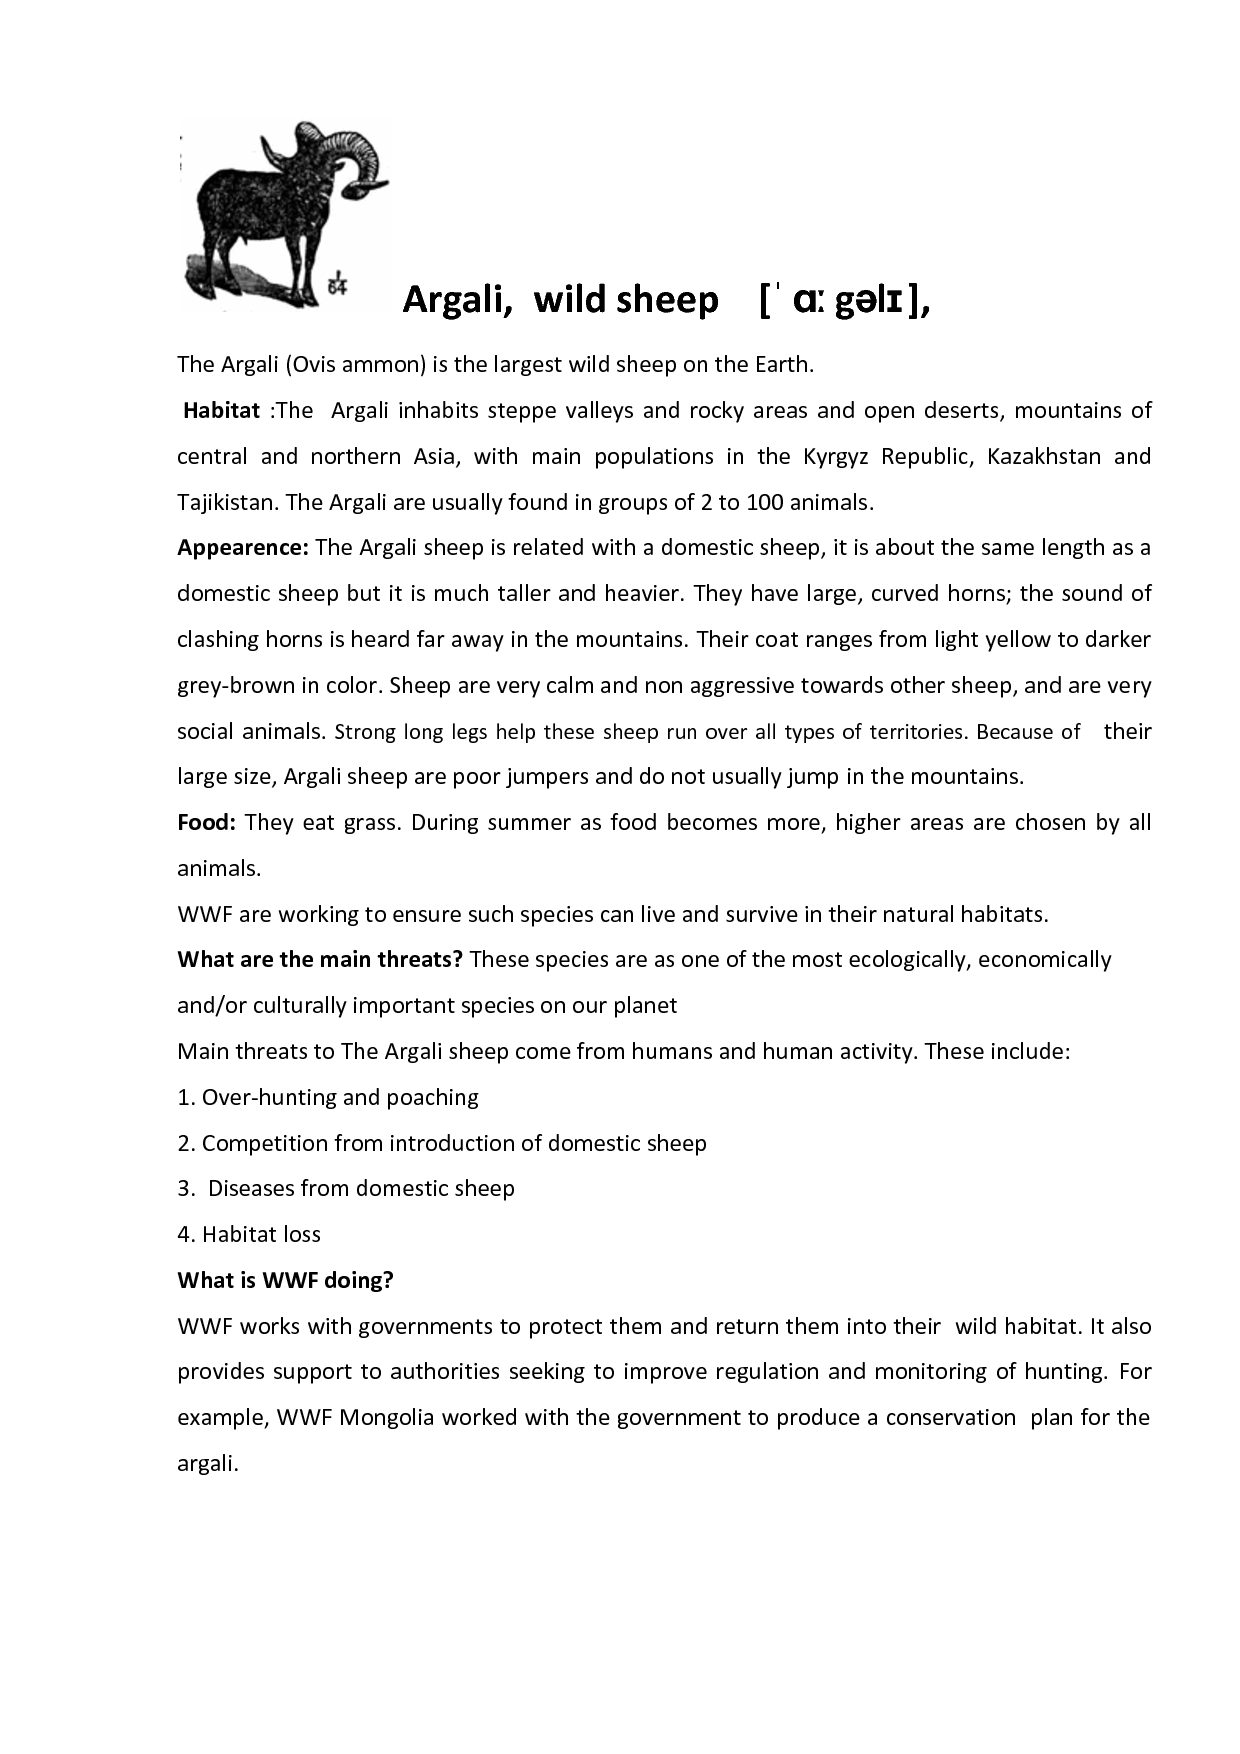 10-best-images-of-reading-worksheets-high-school-history-reading-comprehension-worksheets-high